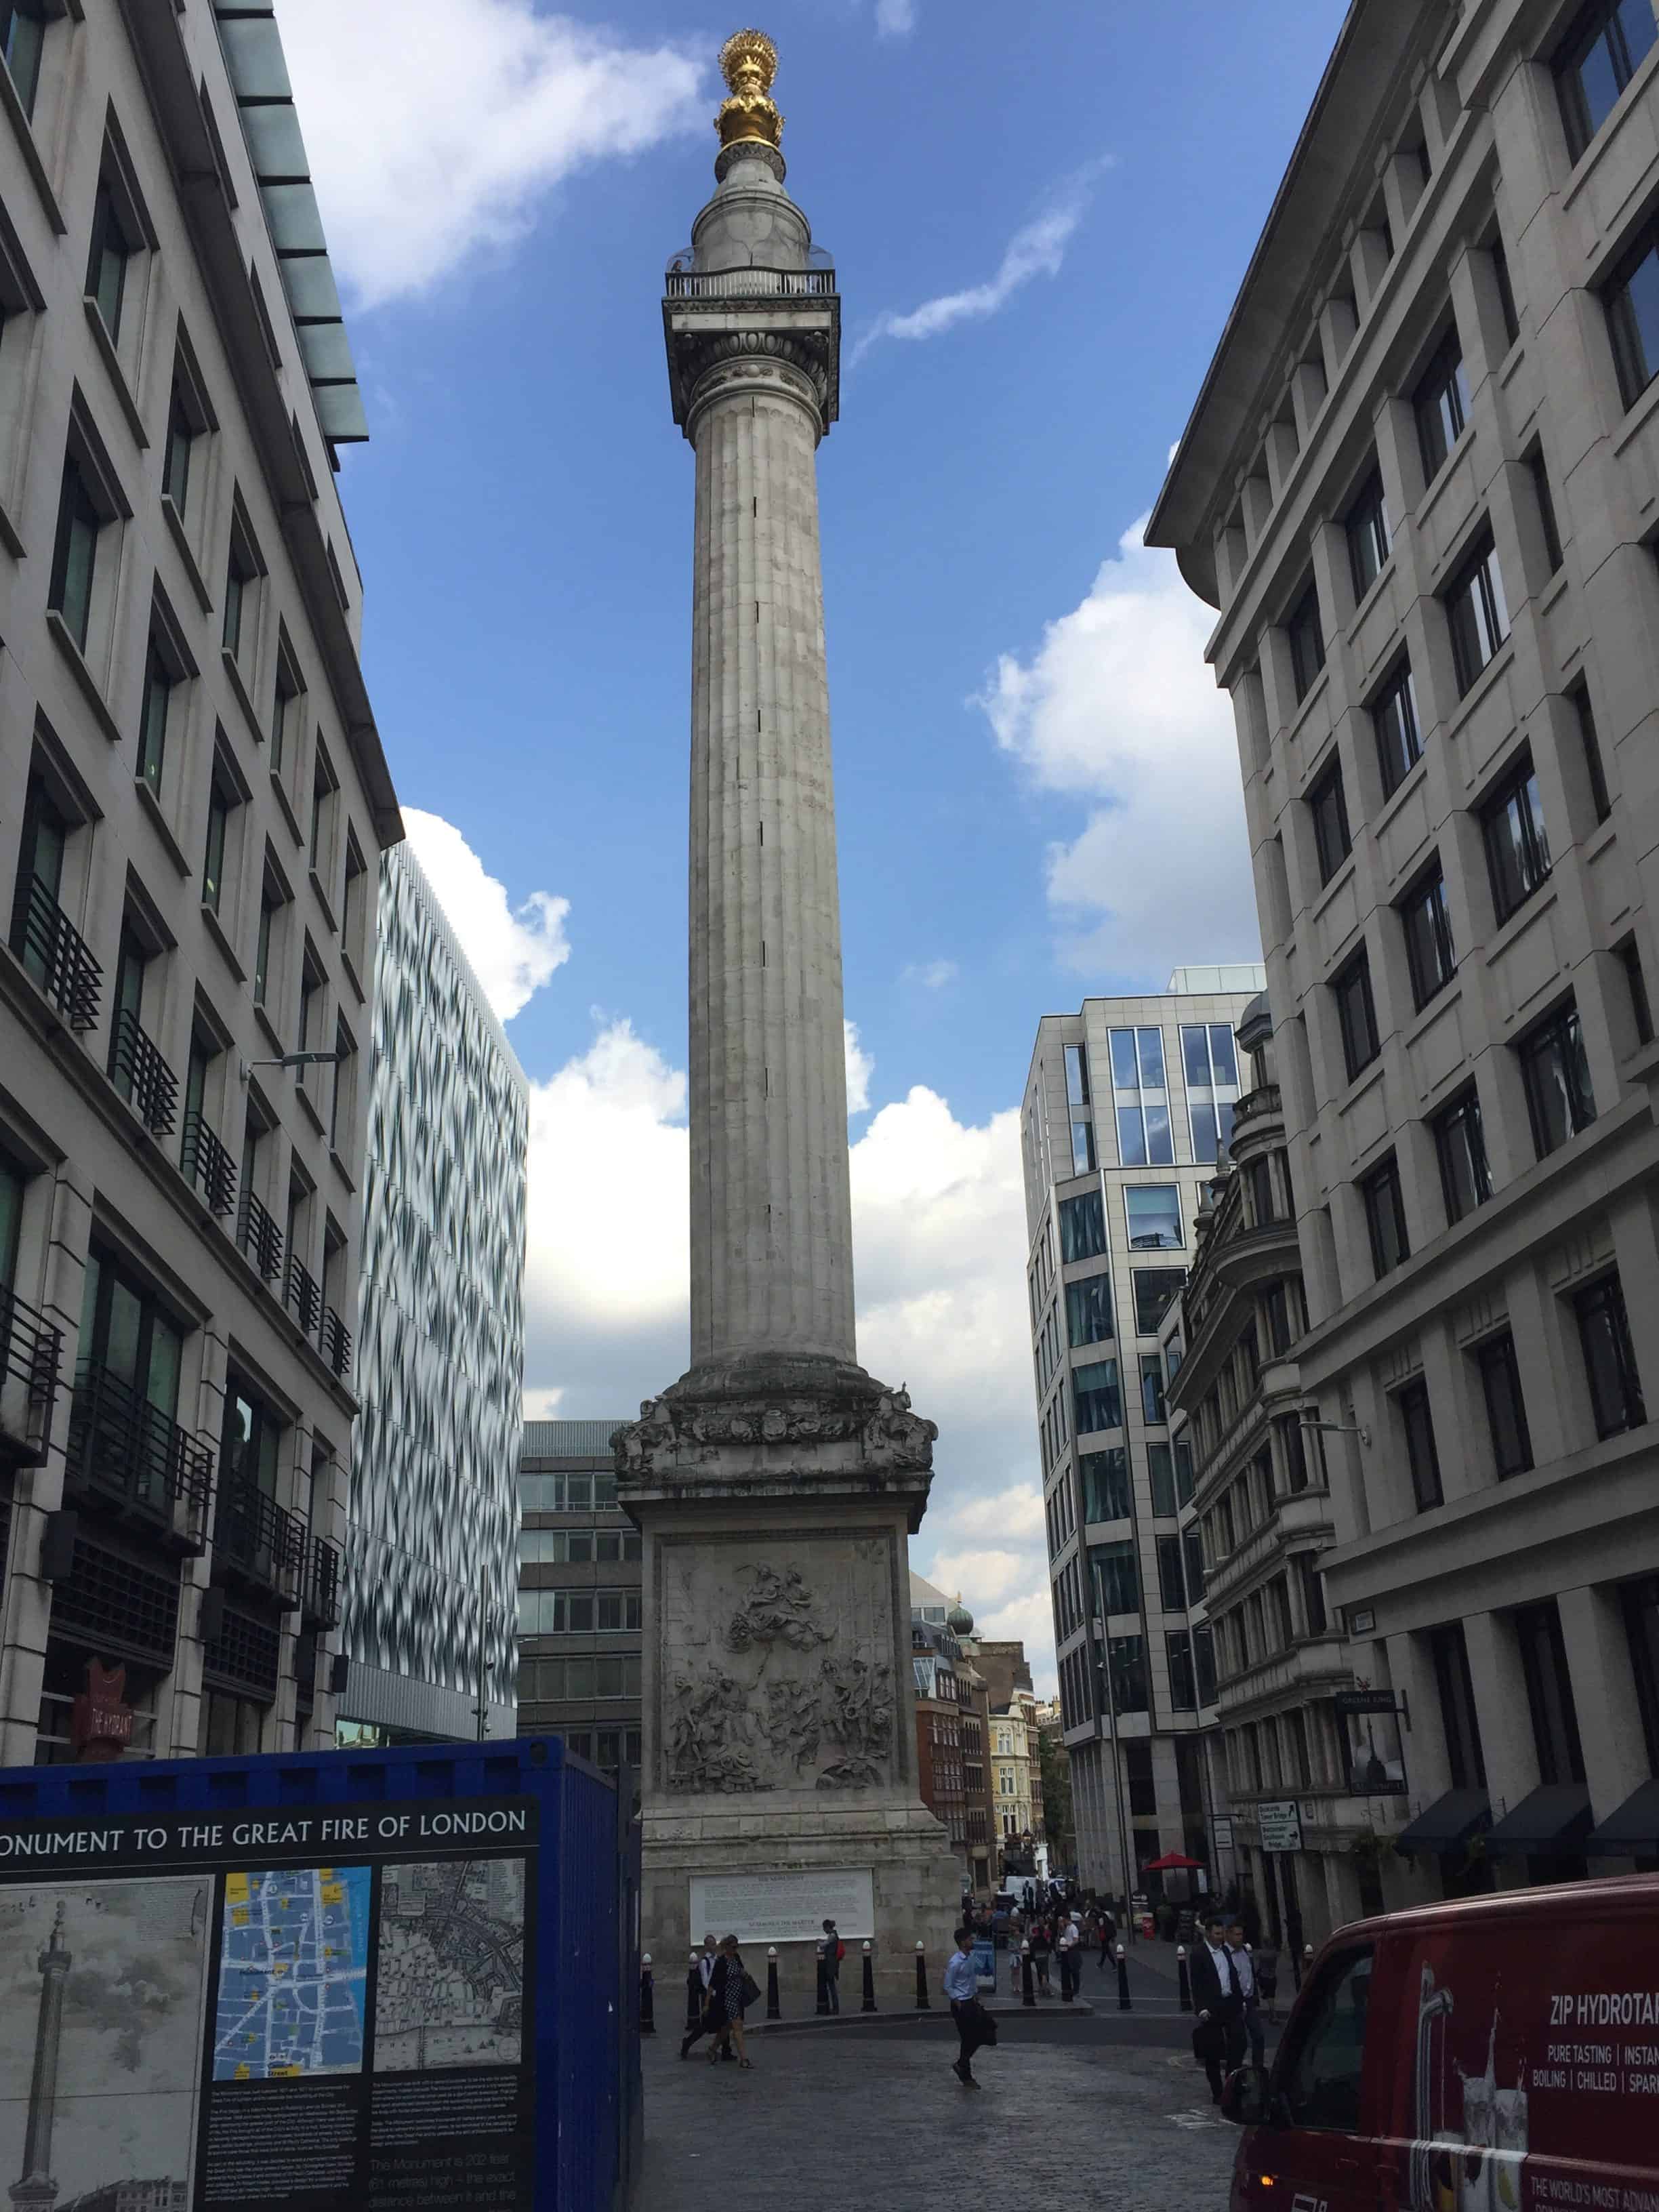 Monument to the great fire of London